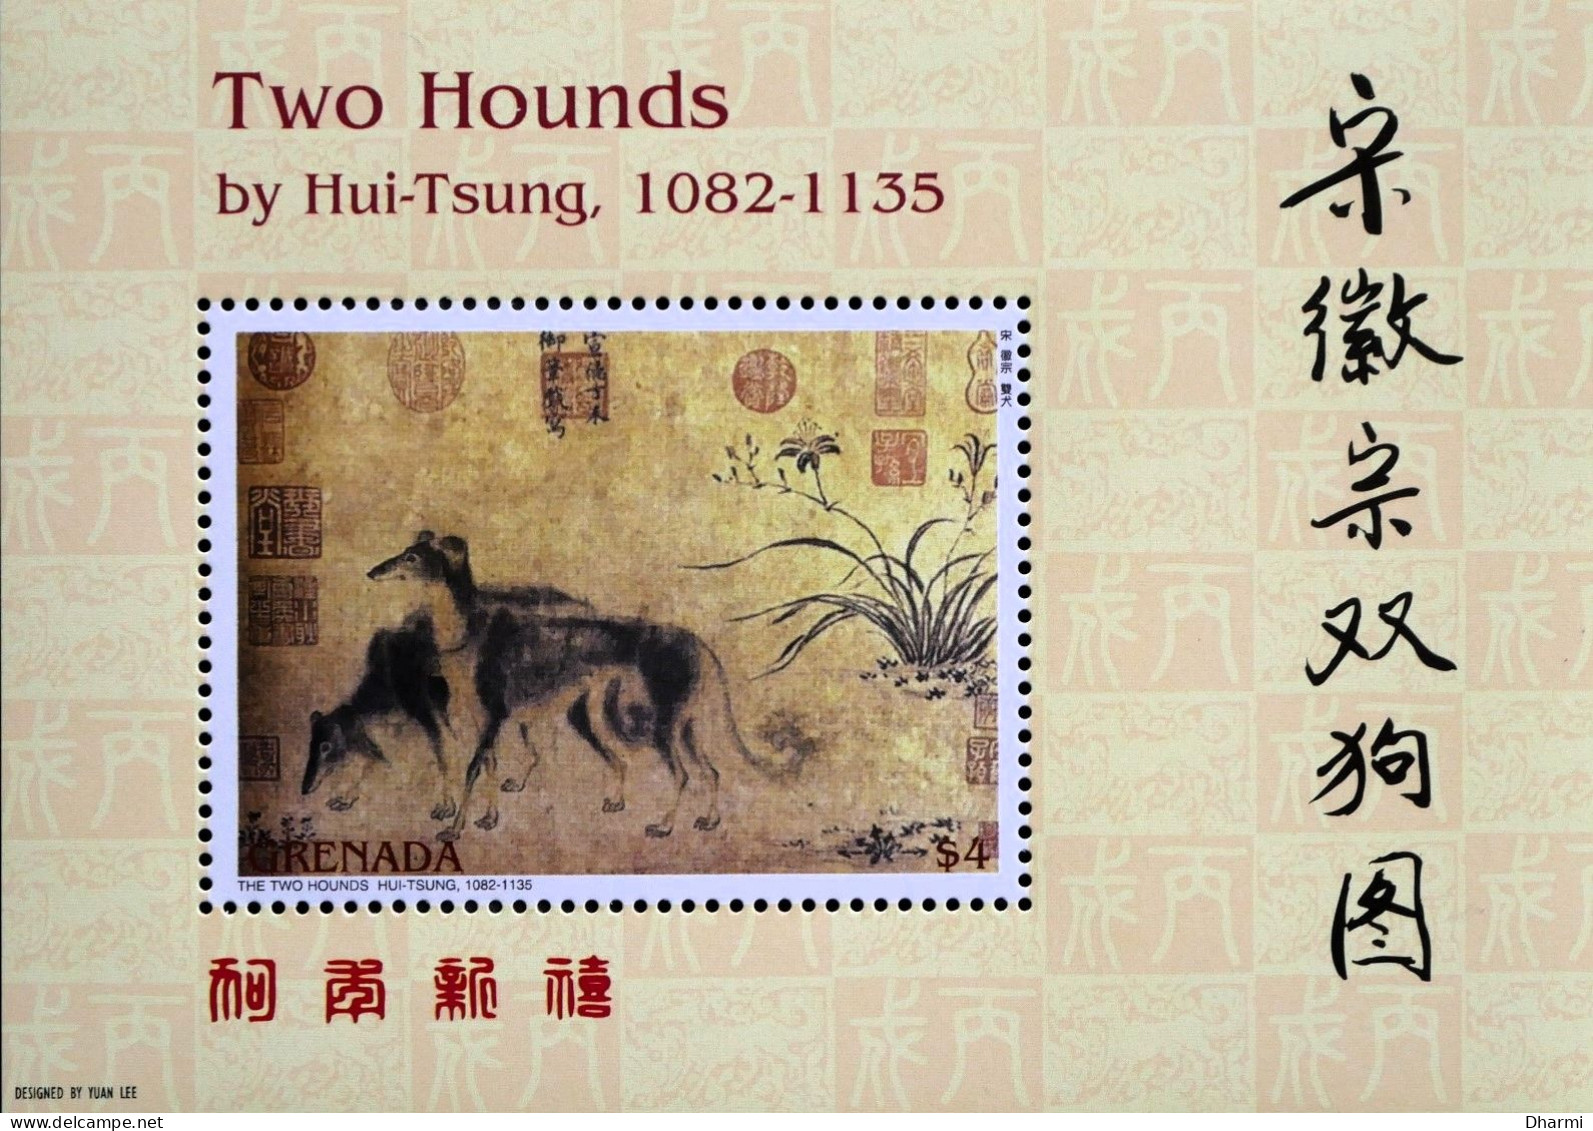 GRENADE GRENADA - LUNAR YEAR OF THE DOG 2006 - MNH** - CHINESE ASTROLOGY - ANNEE LUNAIRE CHIEN - NEUF ** - COT. 5.50 € - Grenade (1974-...)